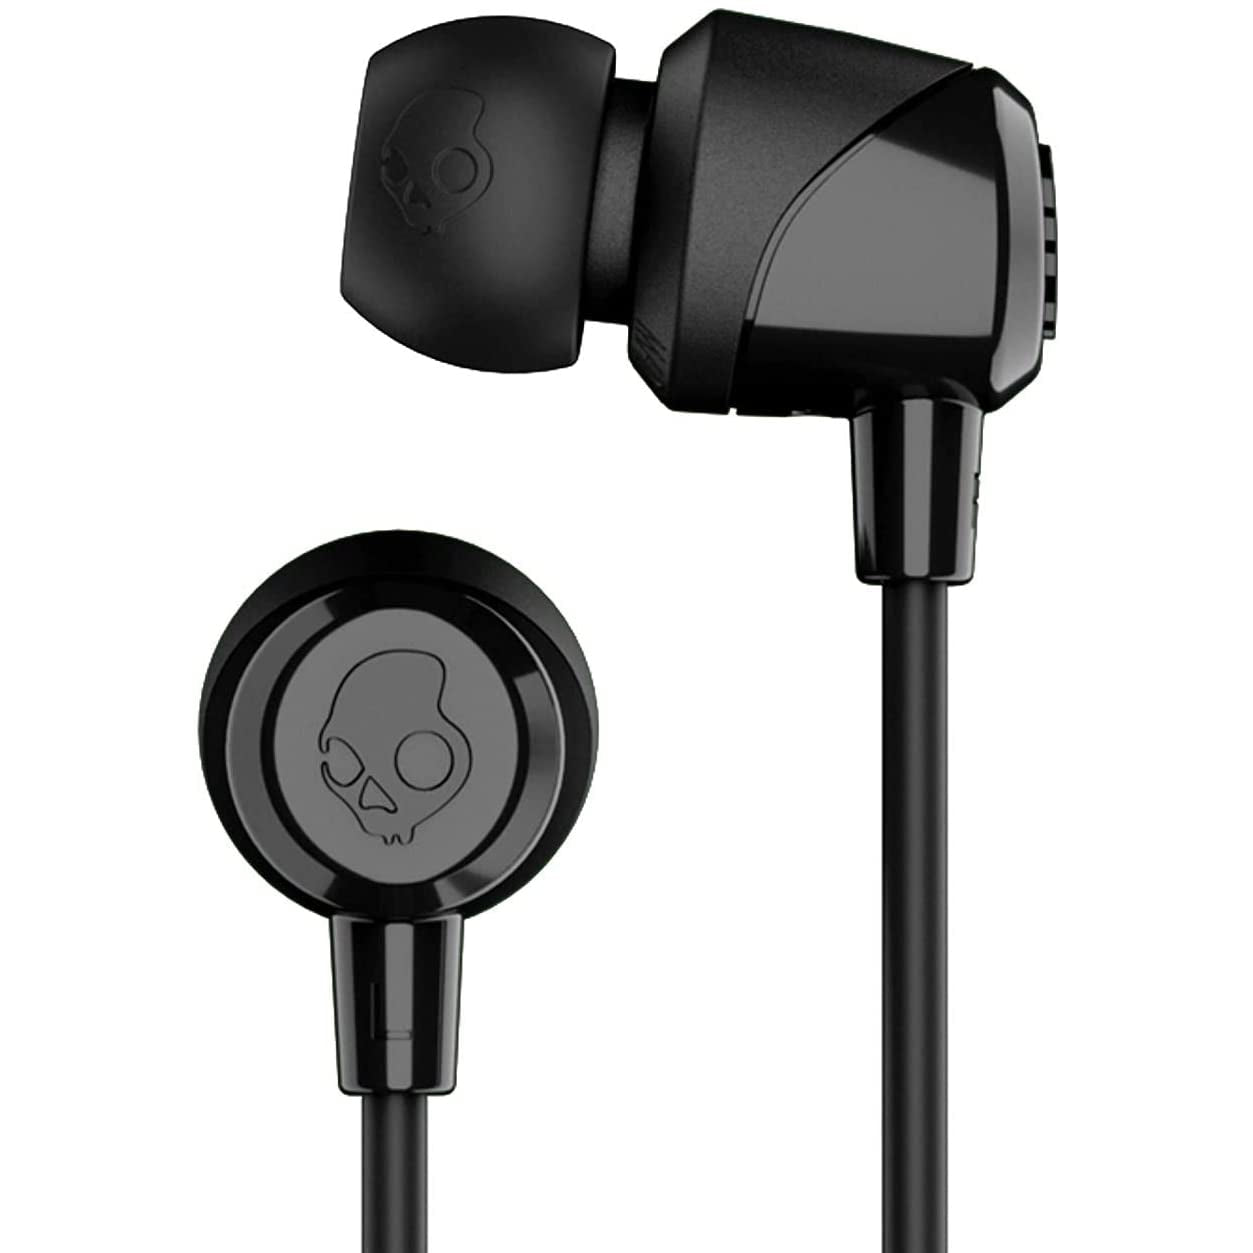 Skullcandy Jib In-Ear Noise-Isolating Earbuds with Microphone and Remote for Hands-Free Calls - Black